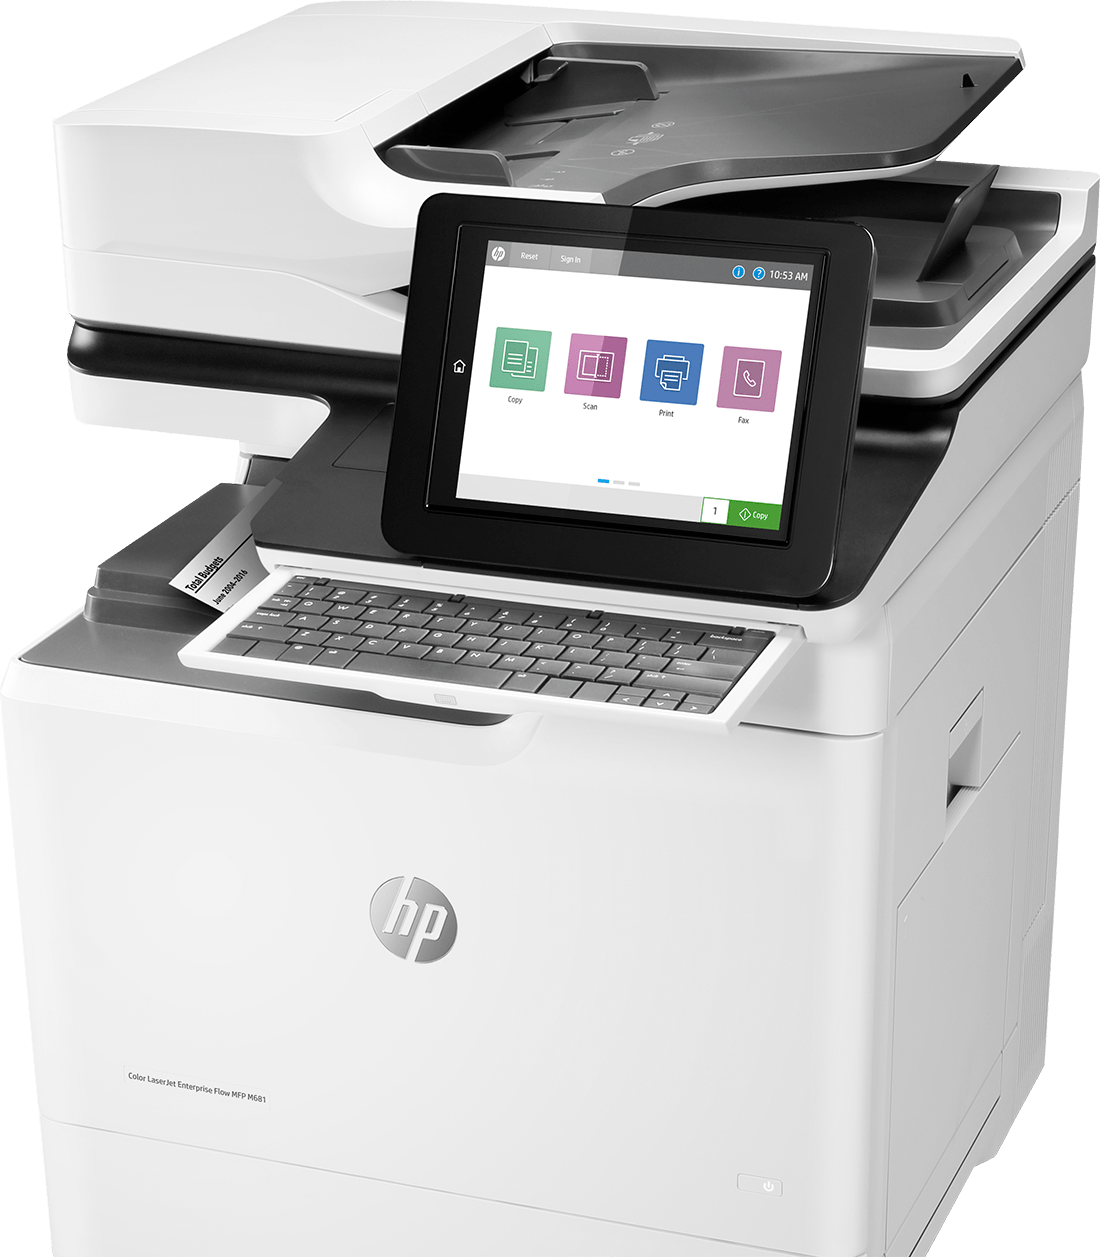 PRINTER LEASING SERVICES